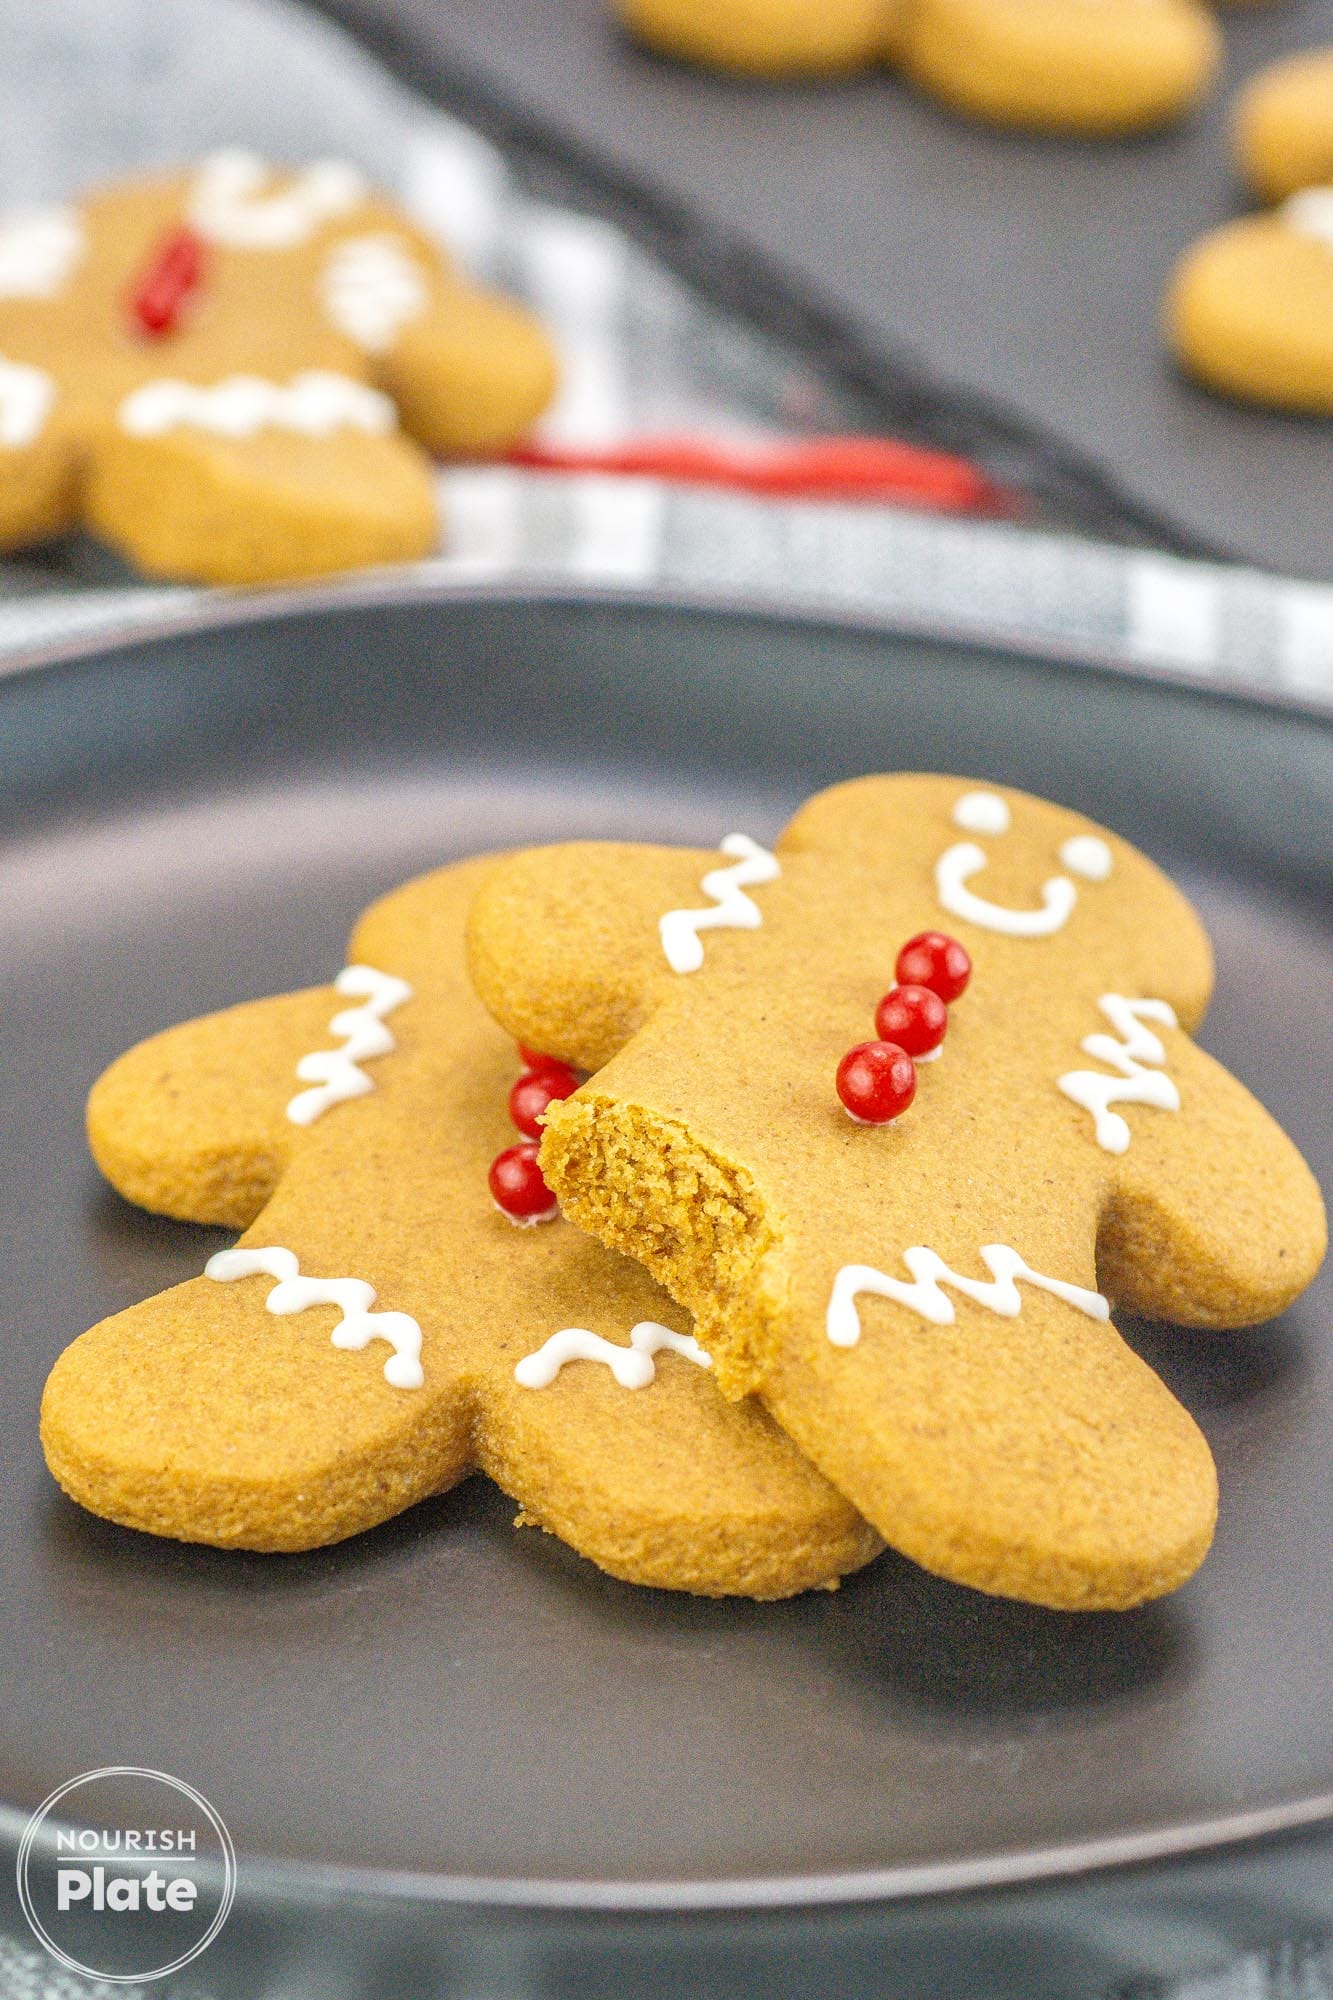 Gingerbread men cookies on a black plate, showing a bite shot